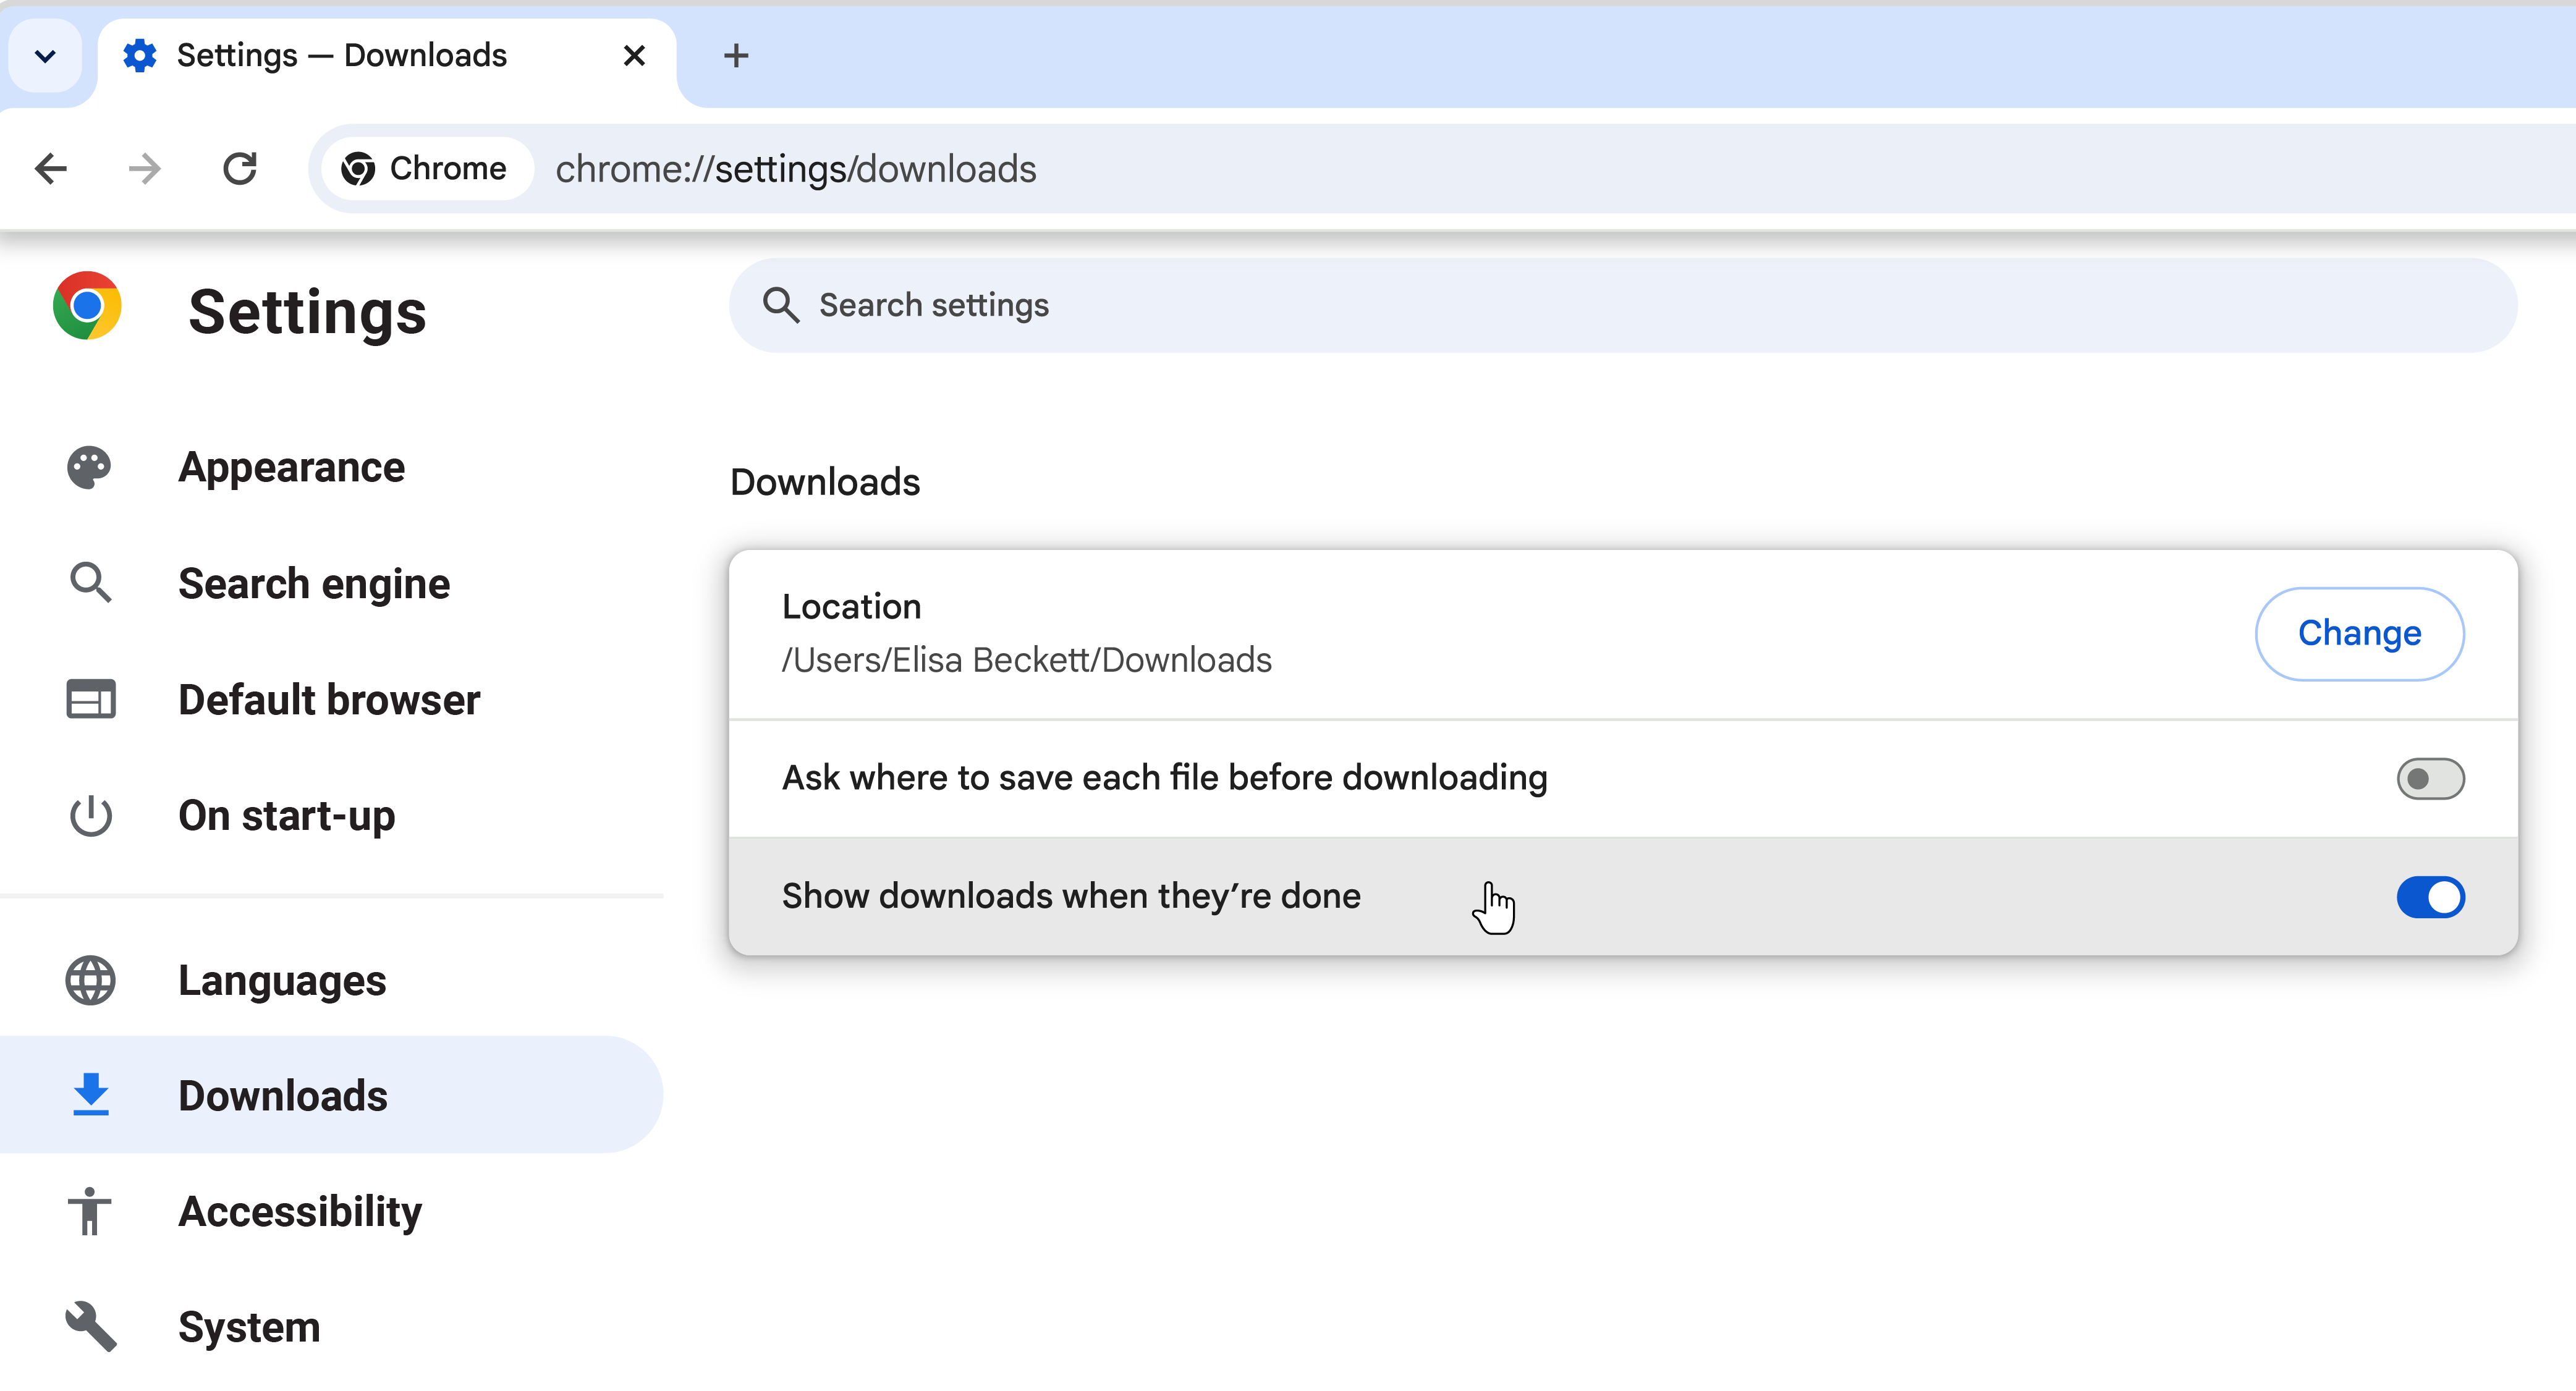 Image of the Downloads settings menu in Chrome browser when you can select the option to disable showing downloads when they're done.